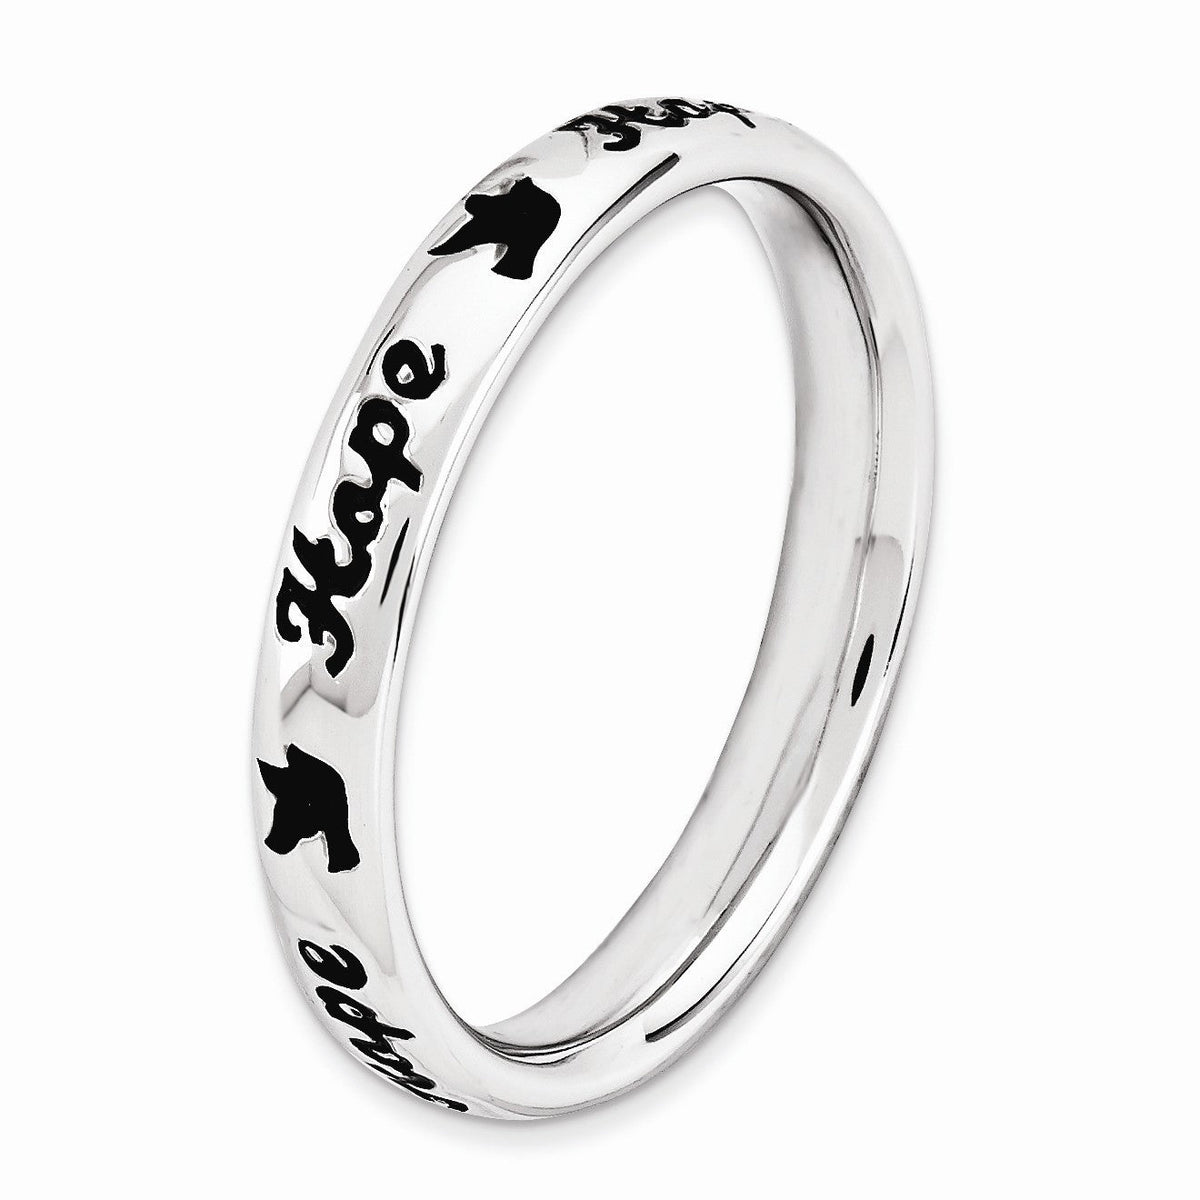 Alternate view of the 3.5mm Sterling Silver Stackable Black Enamel Hope Script Band by The Black Bow Jewelry Co.